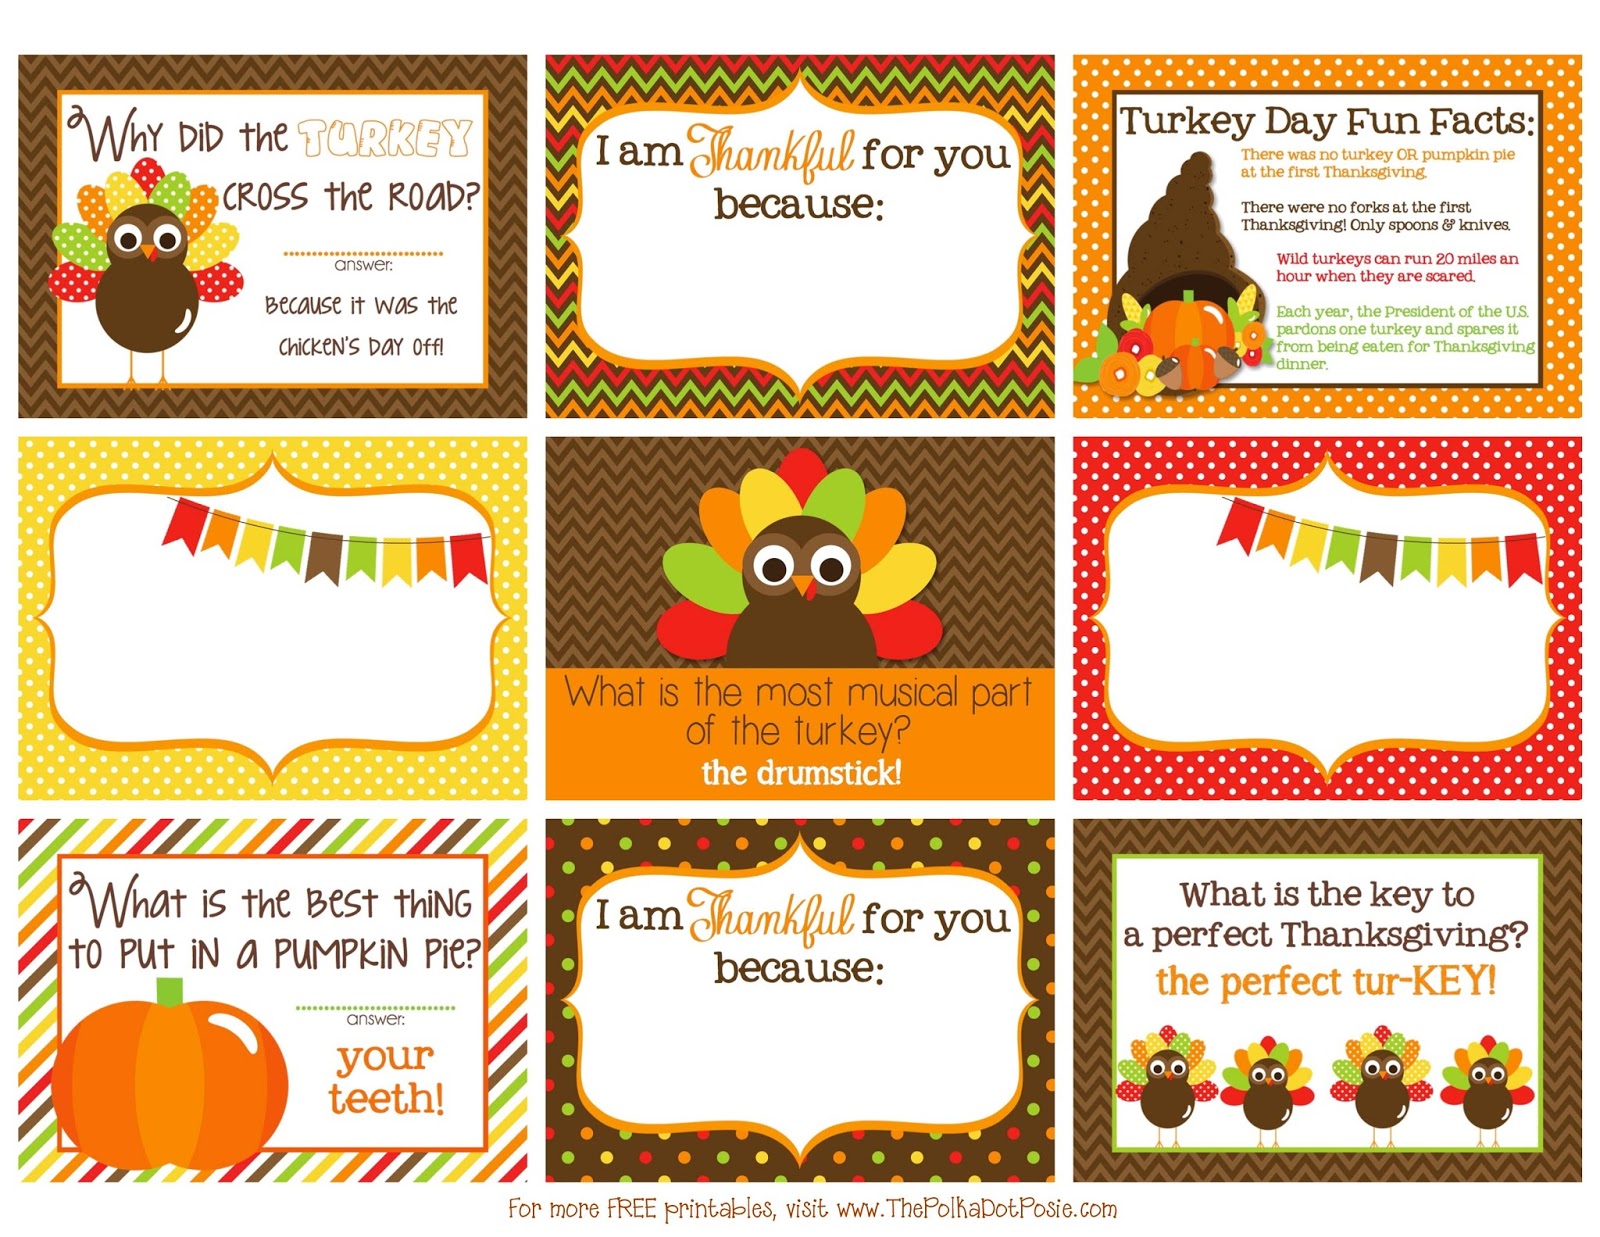 Printable Thanksgiving Lunch Box Notes